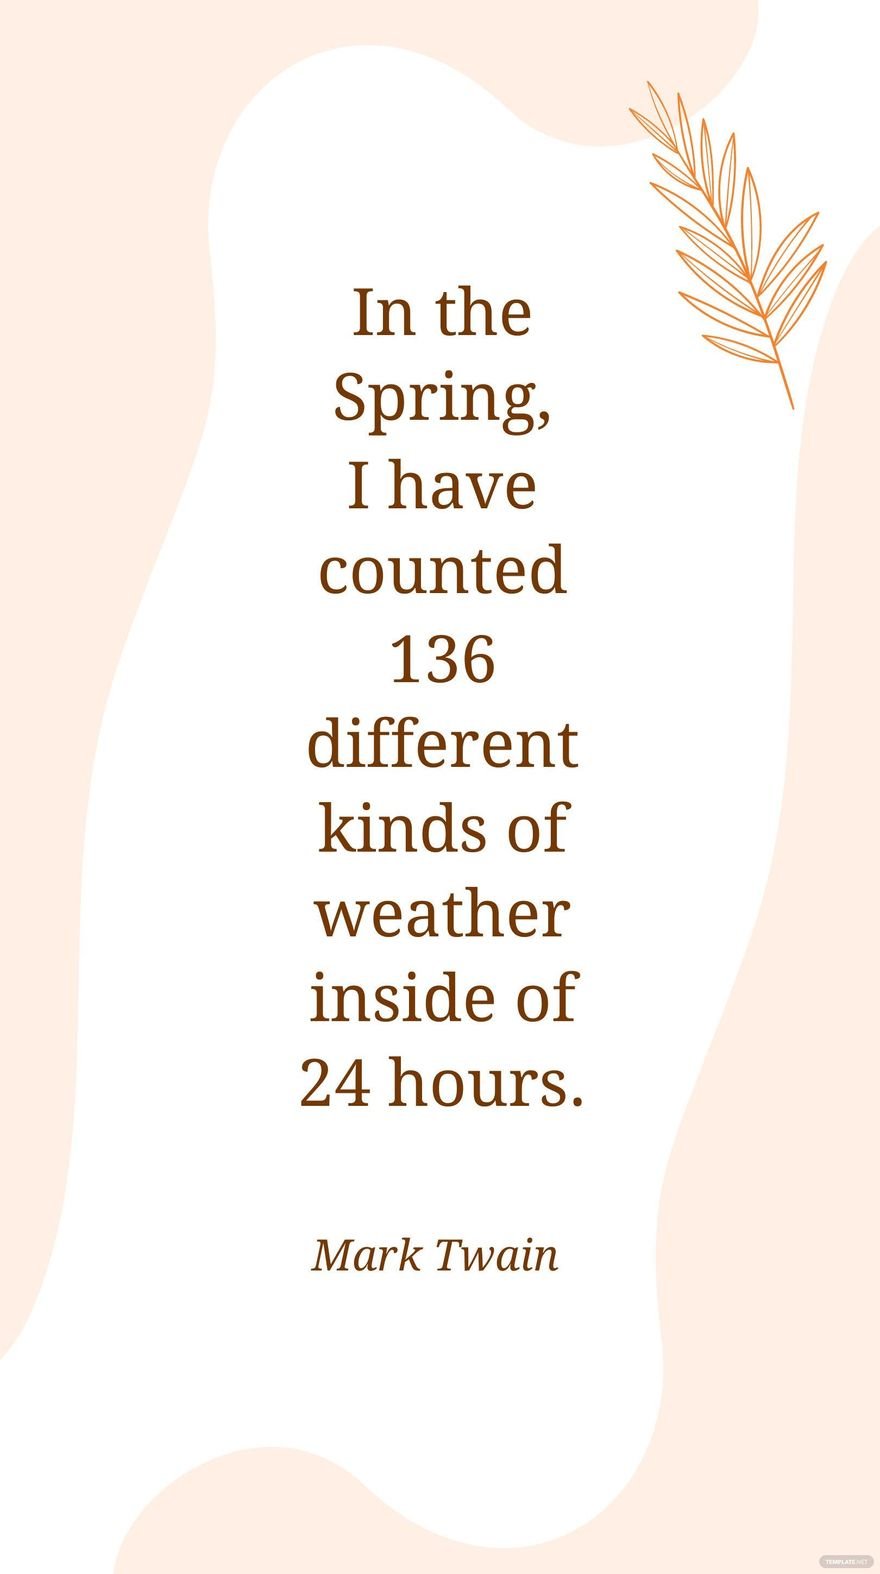 Mark Twain - In the Spring, I have counted 136 different kinds of weather inside of 24 hours.